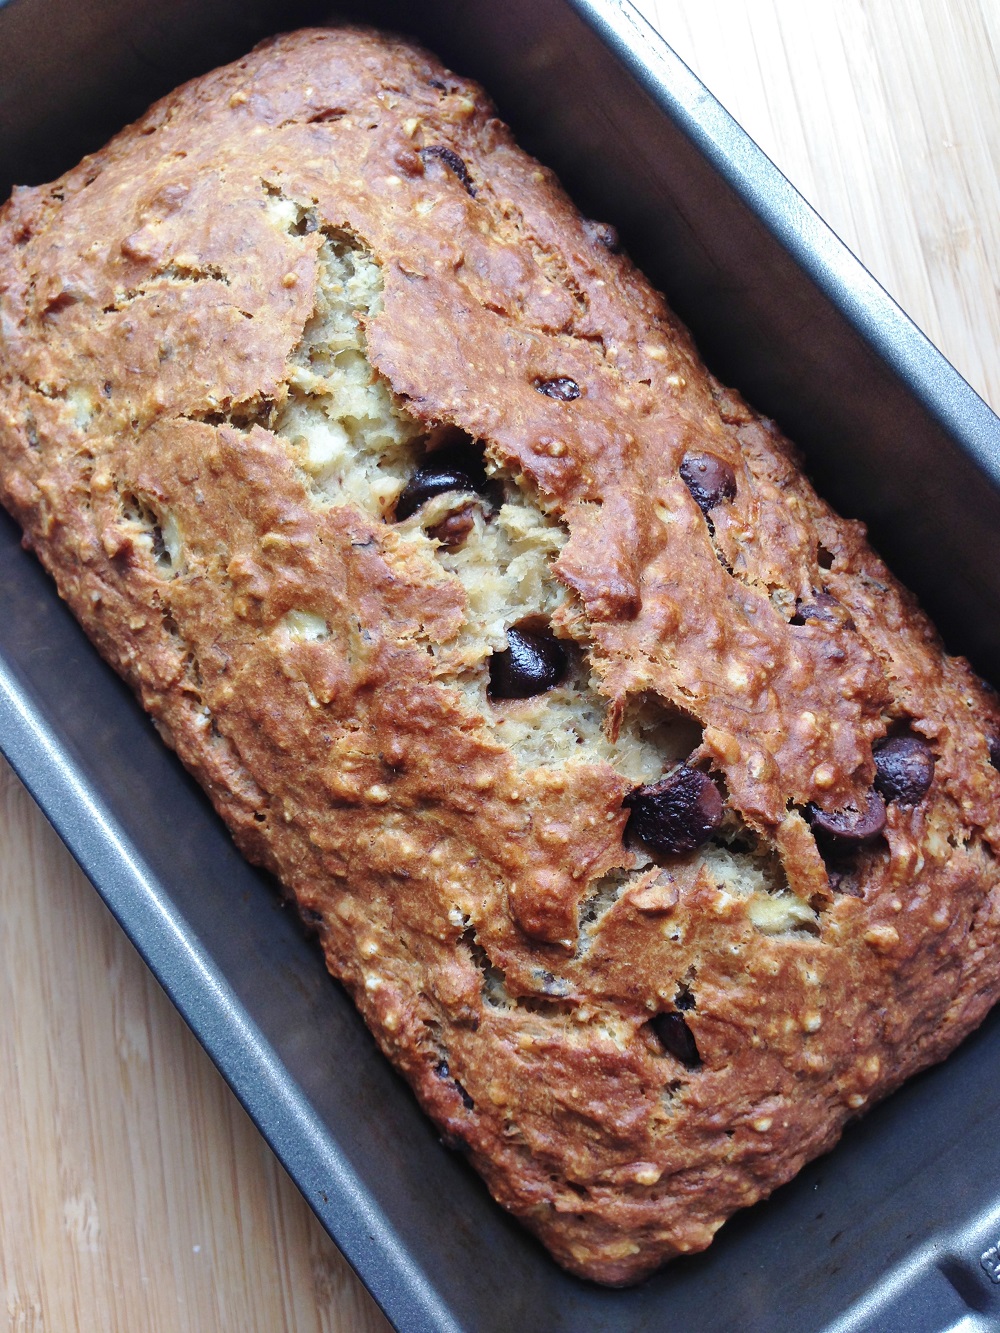 Gluten Free Banana Nut Bread with Chocolate Chips | Gluten Free by Jan